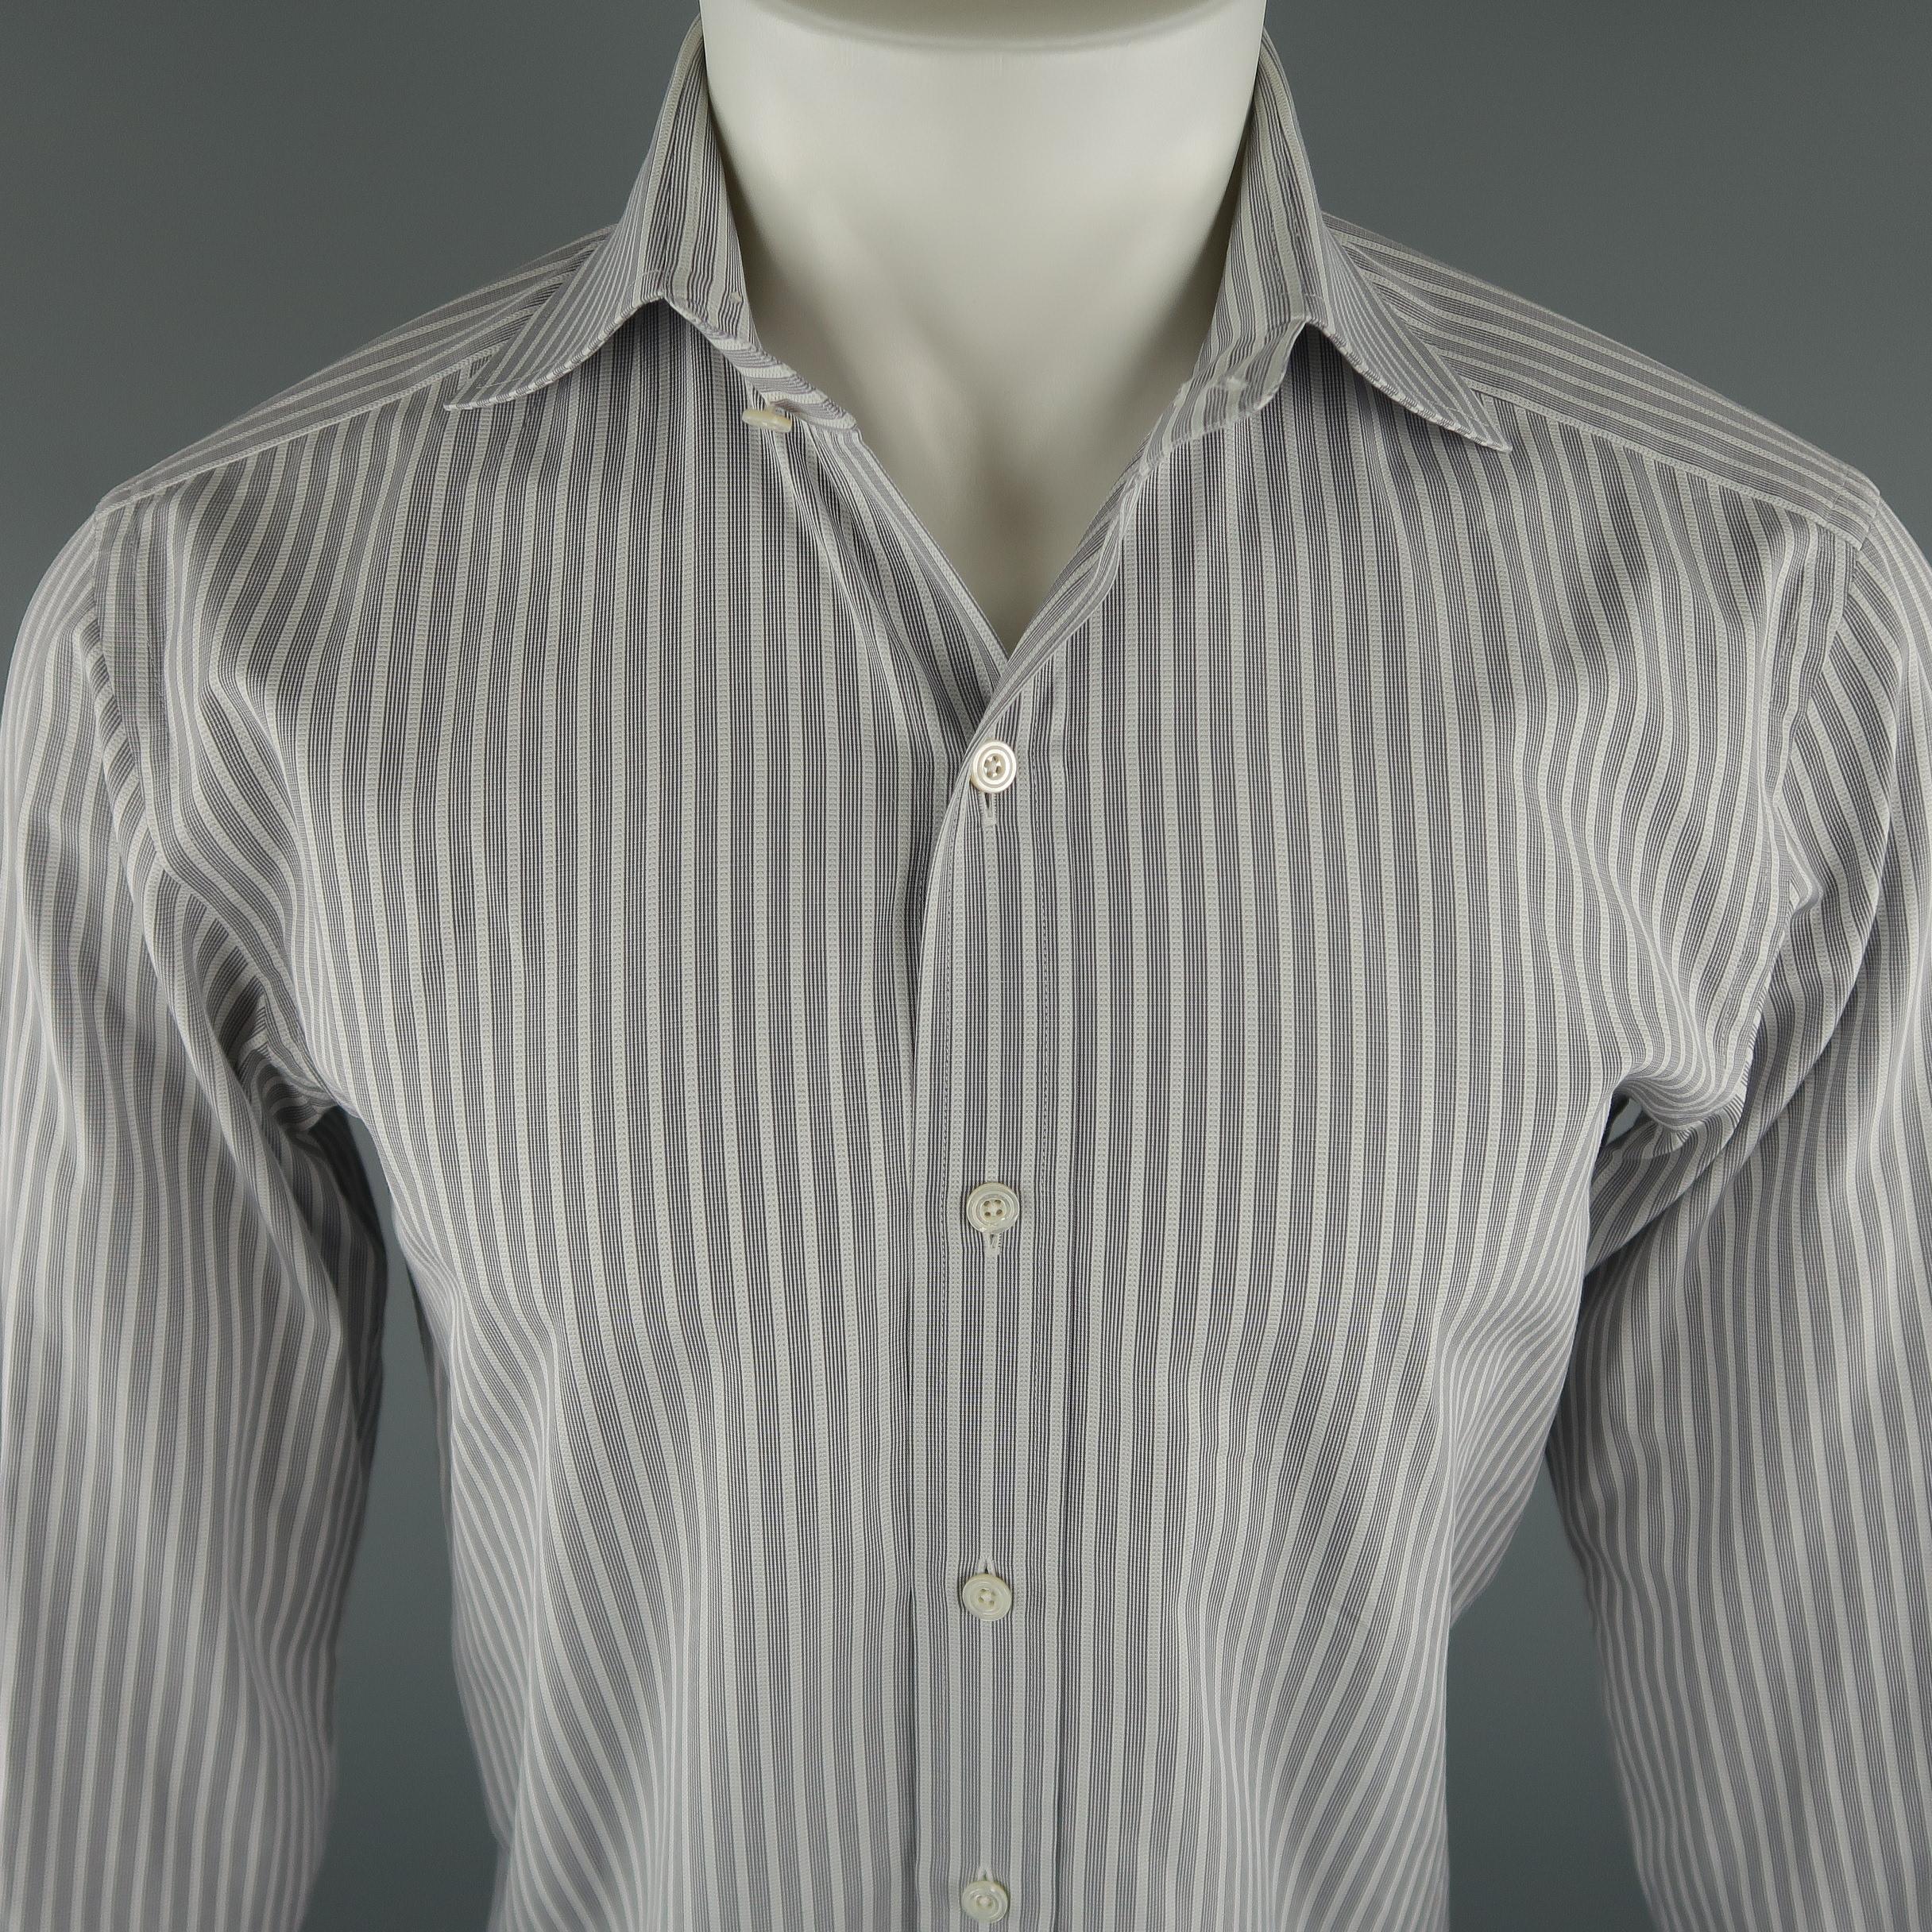 TOM FORD shirt come in grey tones, in a striped cotton material, button up, spread collar and long sleeves. Made in Switzerland.
 
Excellent Pre-Owned Condition.
Marked: 40 IT
 
Measurements:
 
Shoulder: 17 in.
Chest: 42 in.
Sleeve: 24.5 in.
Length: